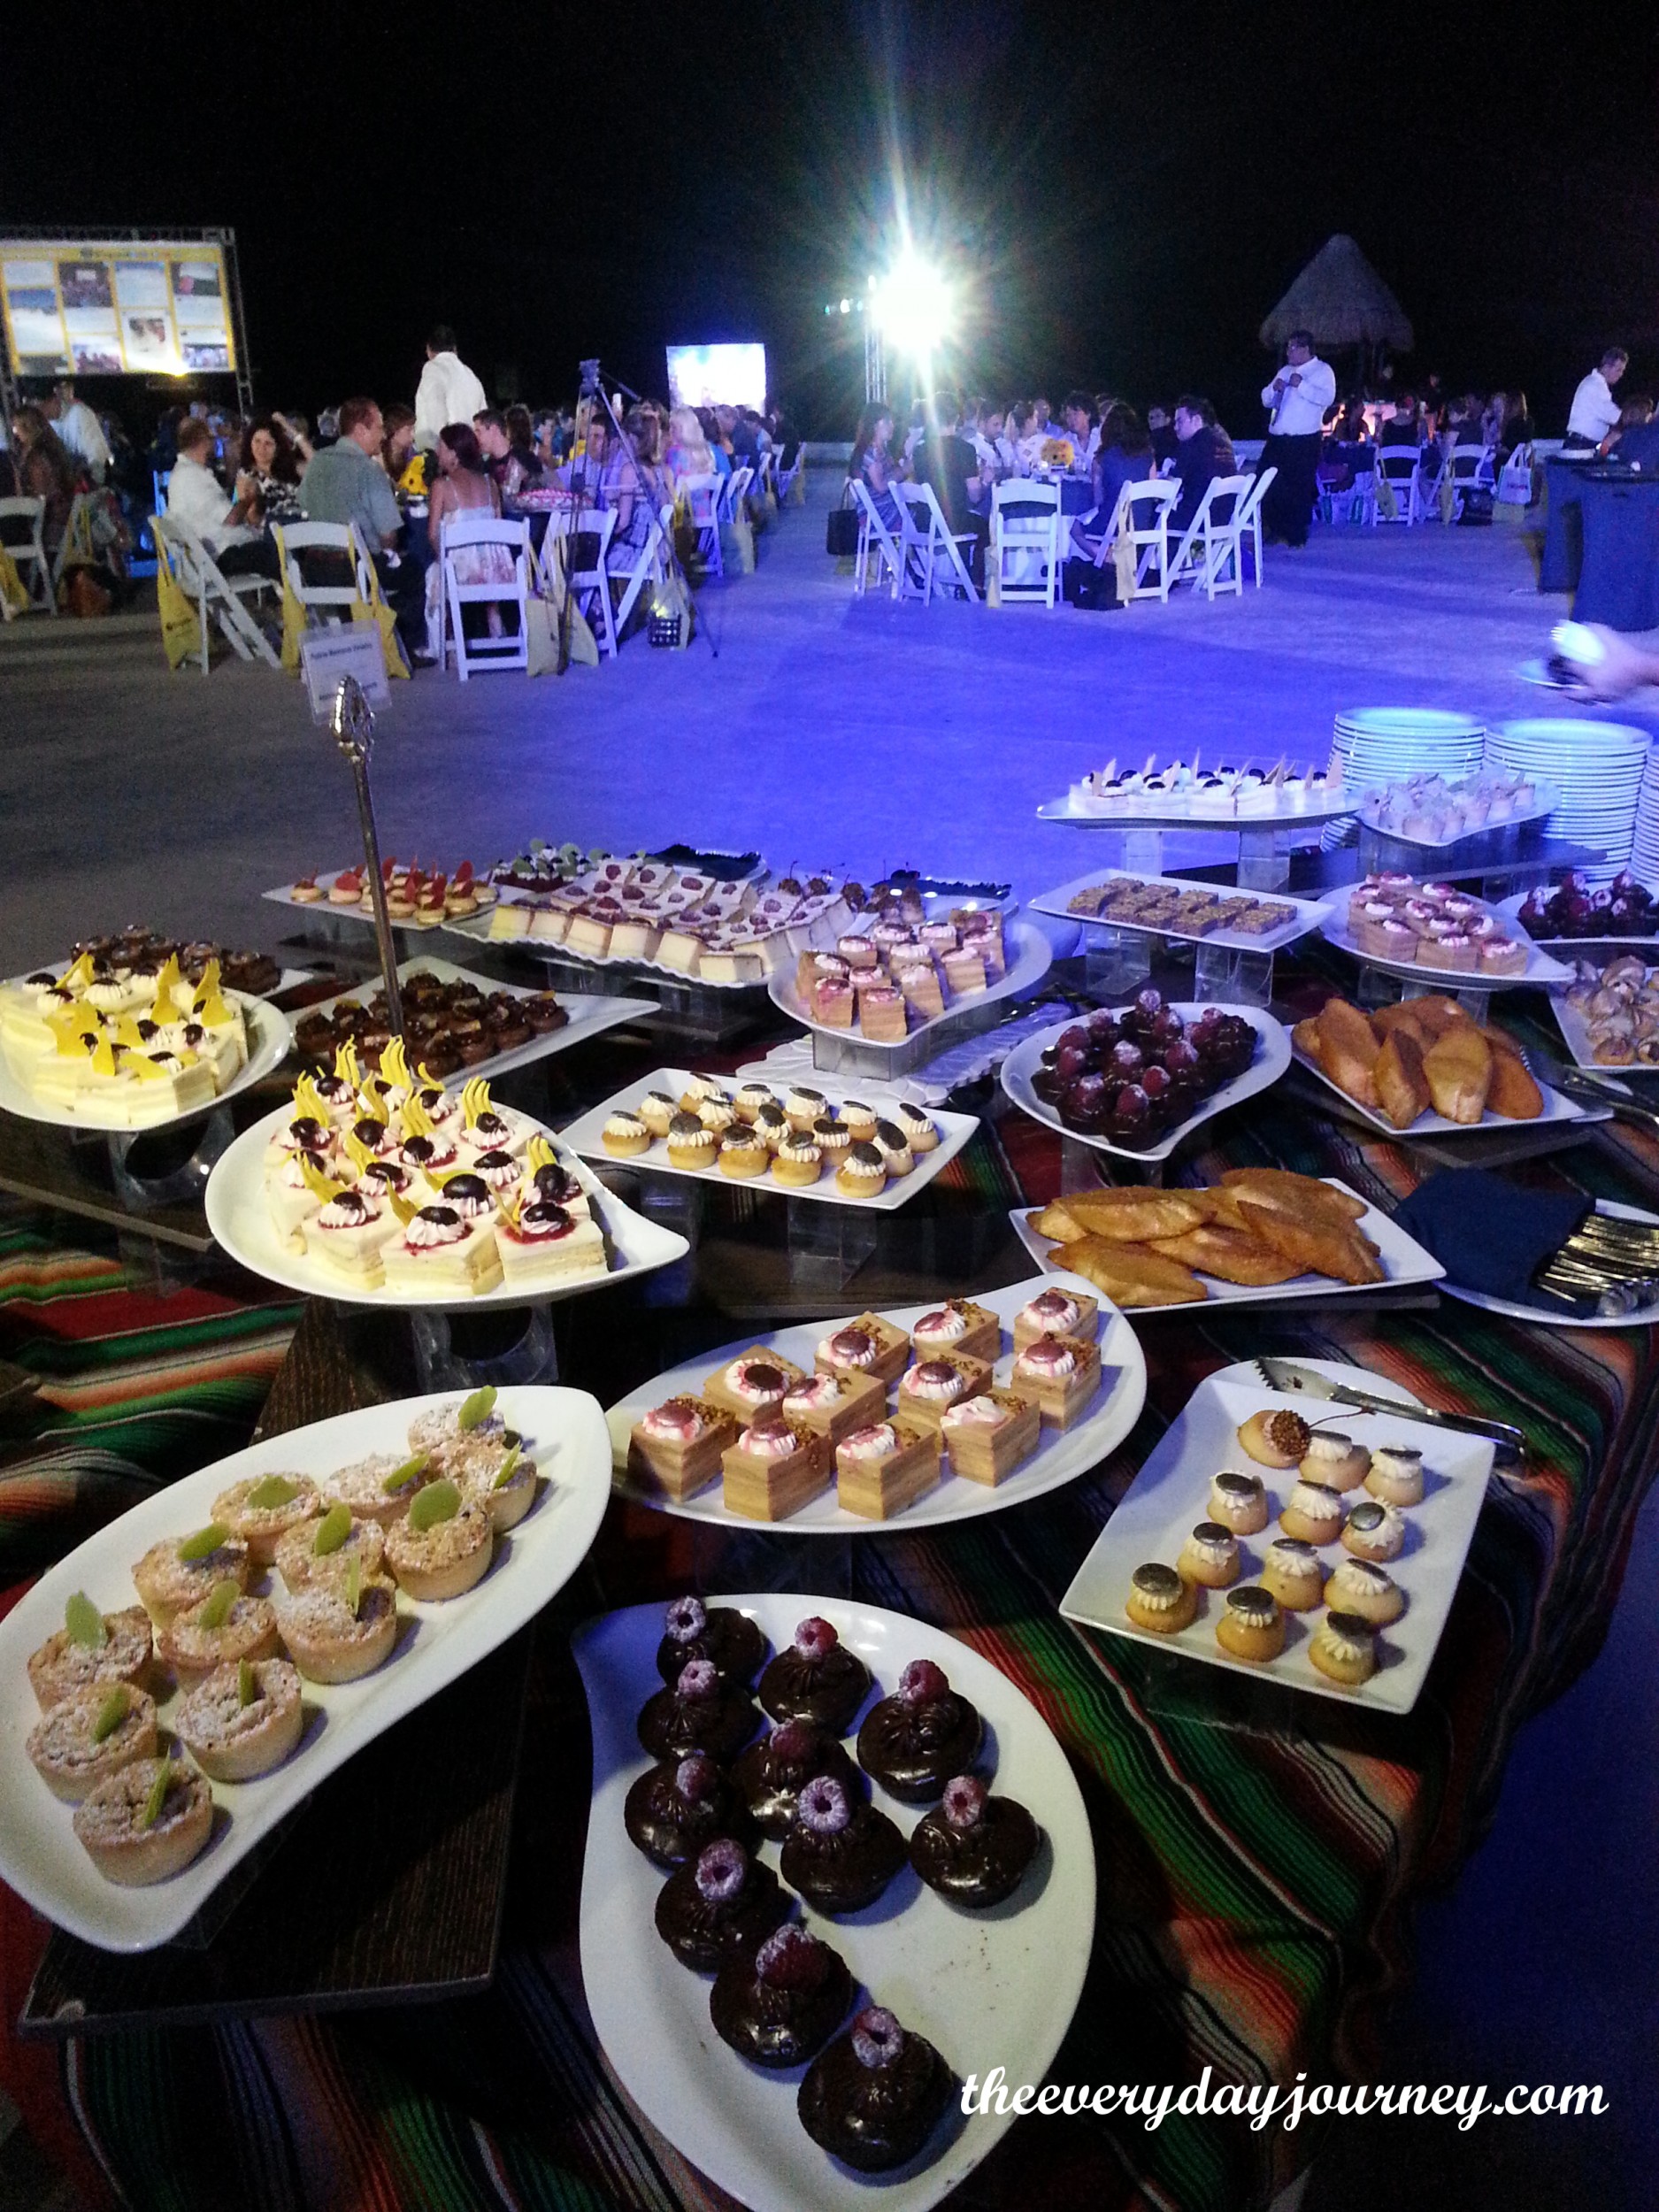 This is just the dessert table-imagine what else we ate at the Expedia party!